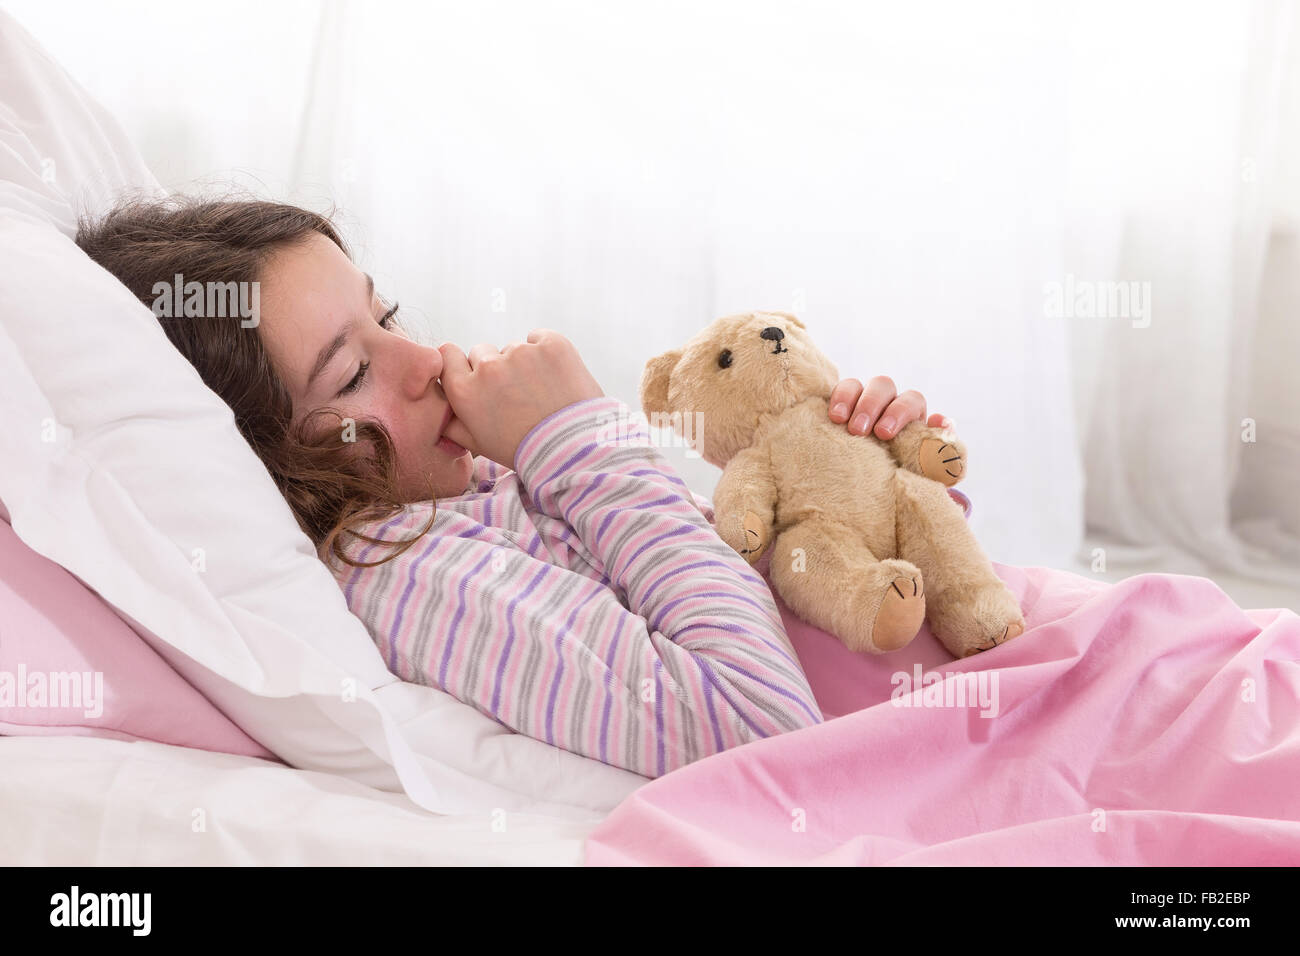 Young Teenager Asleep in Bed with Teddy Bear Stock Photo